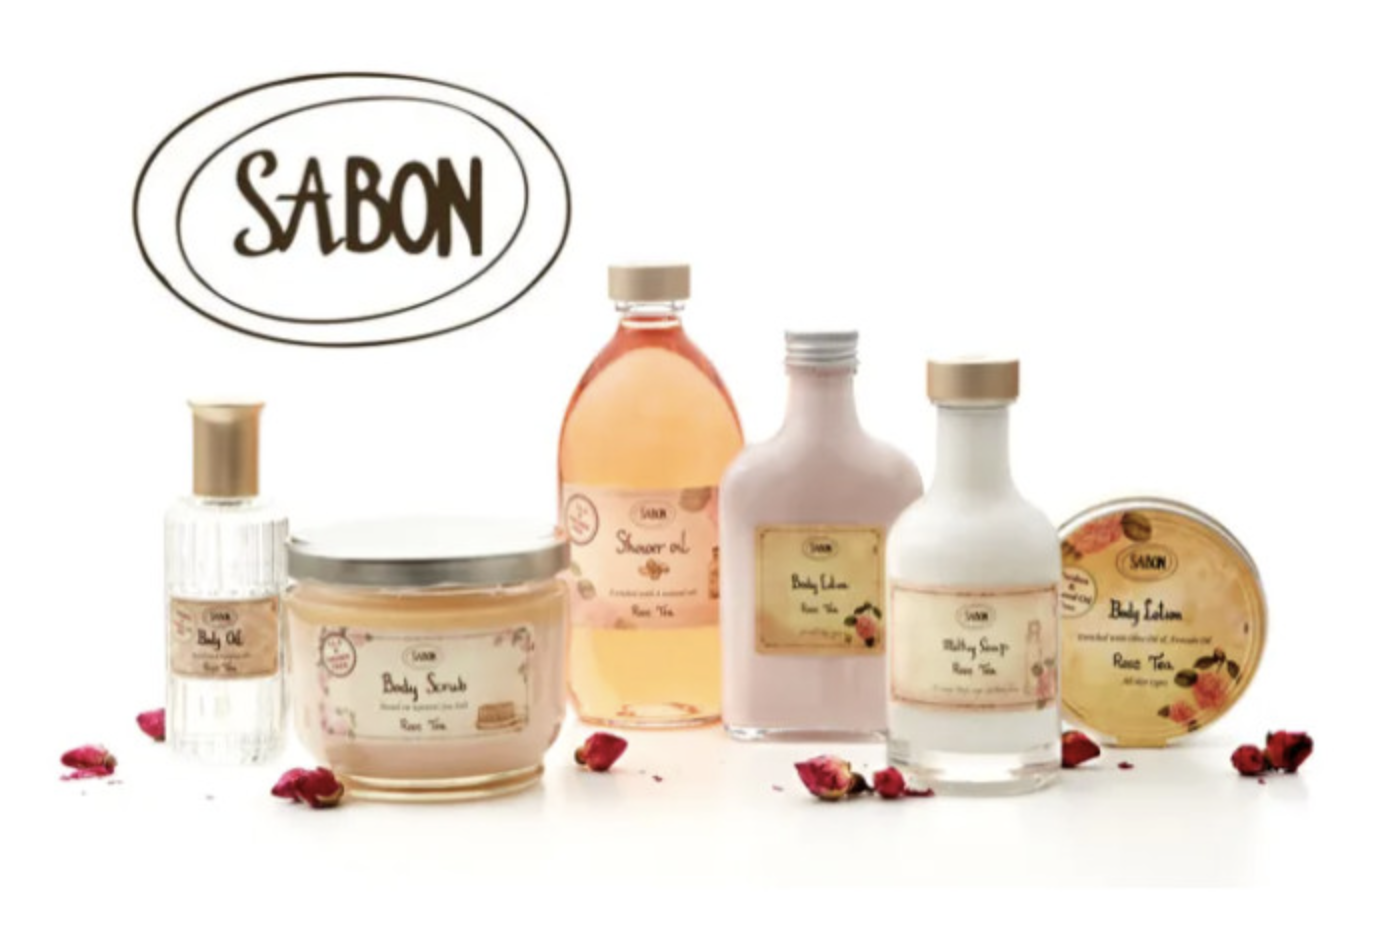 Sabon: Buy One, Get One Free select items